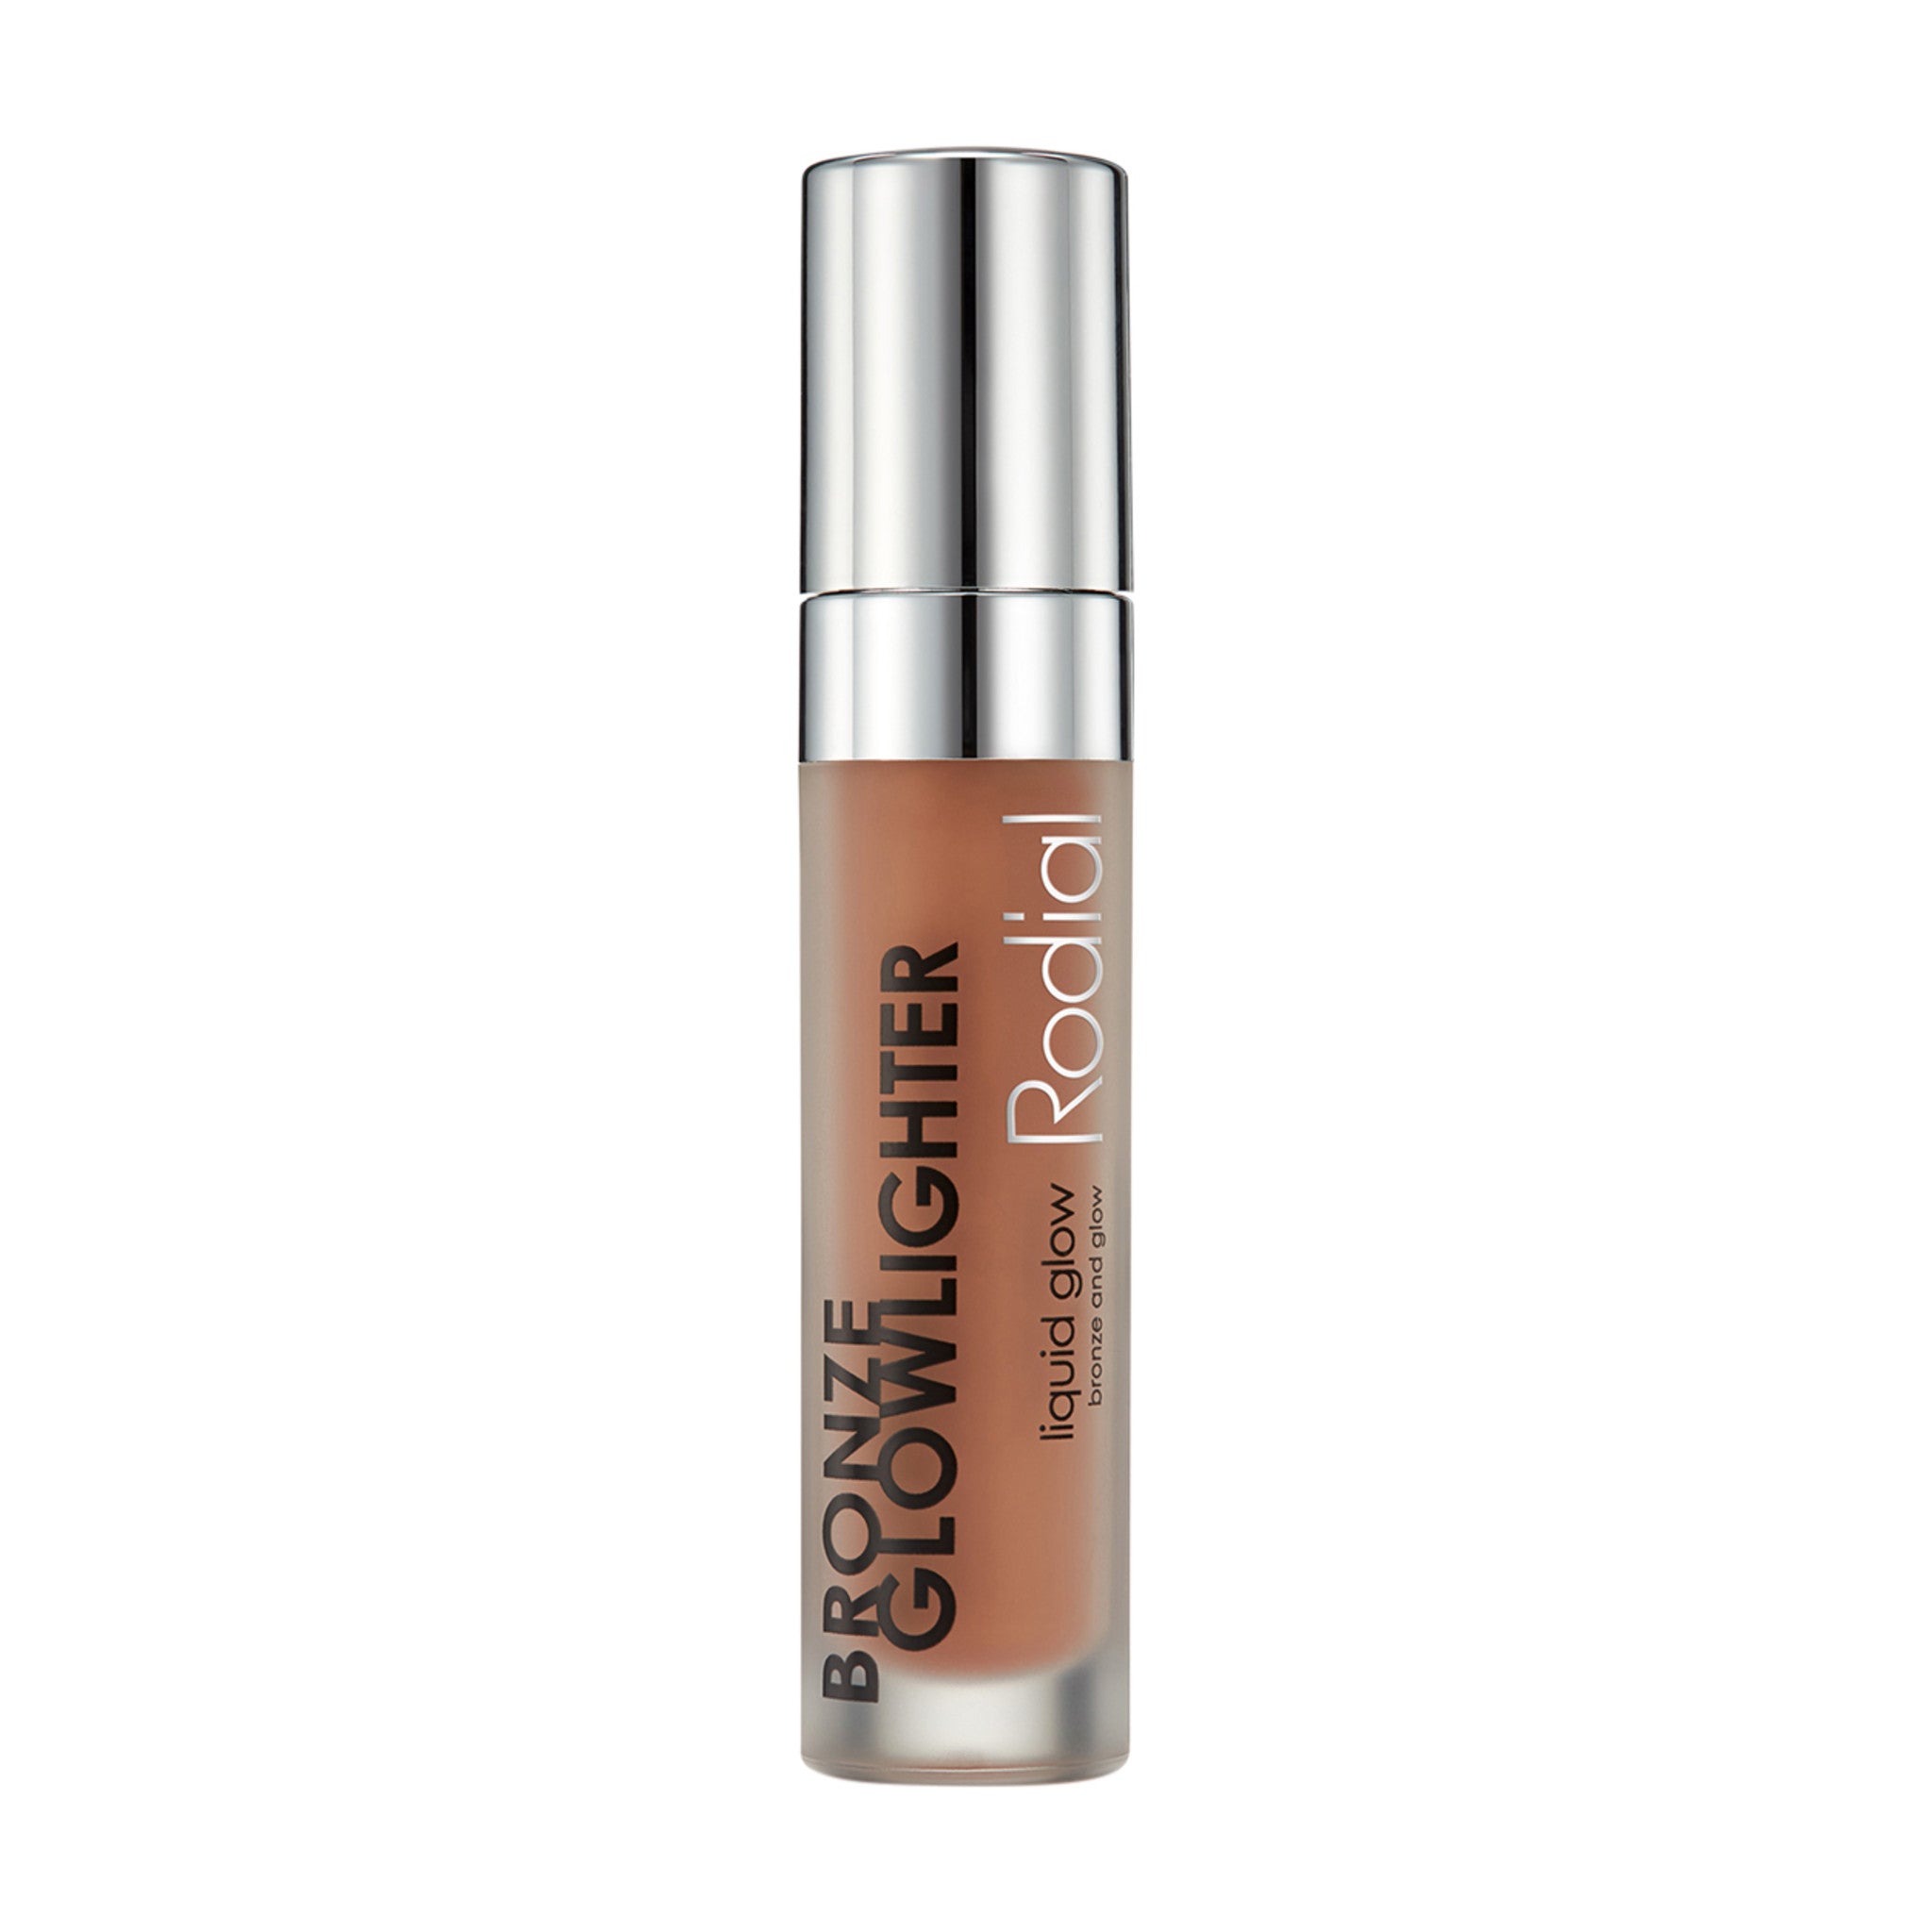 Rodial Bronze Glowlighter main image. This product is in the color bronze